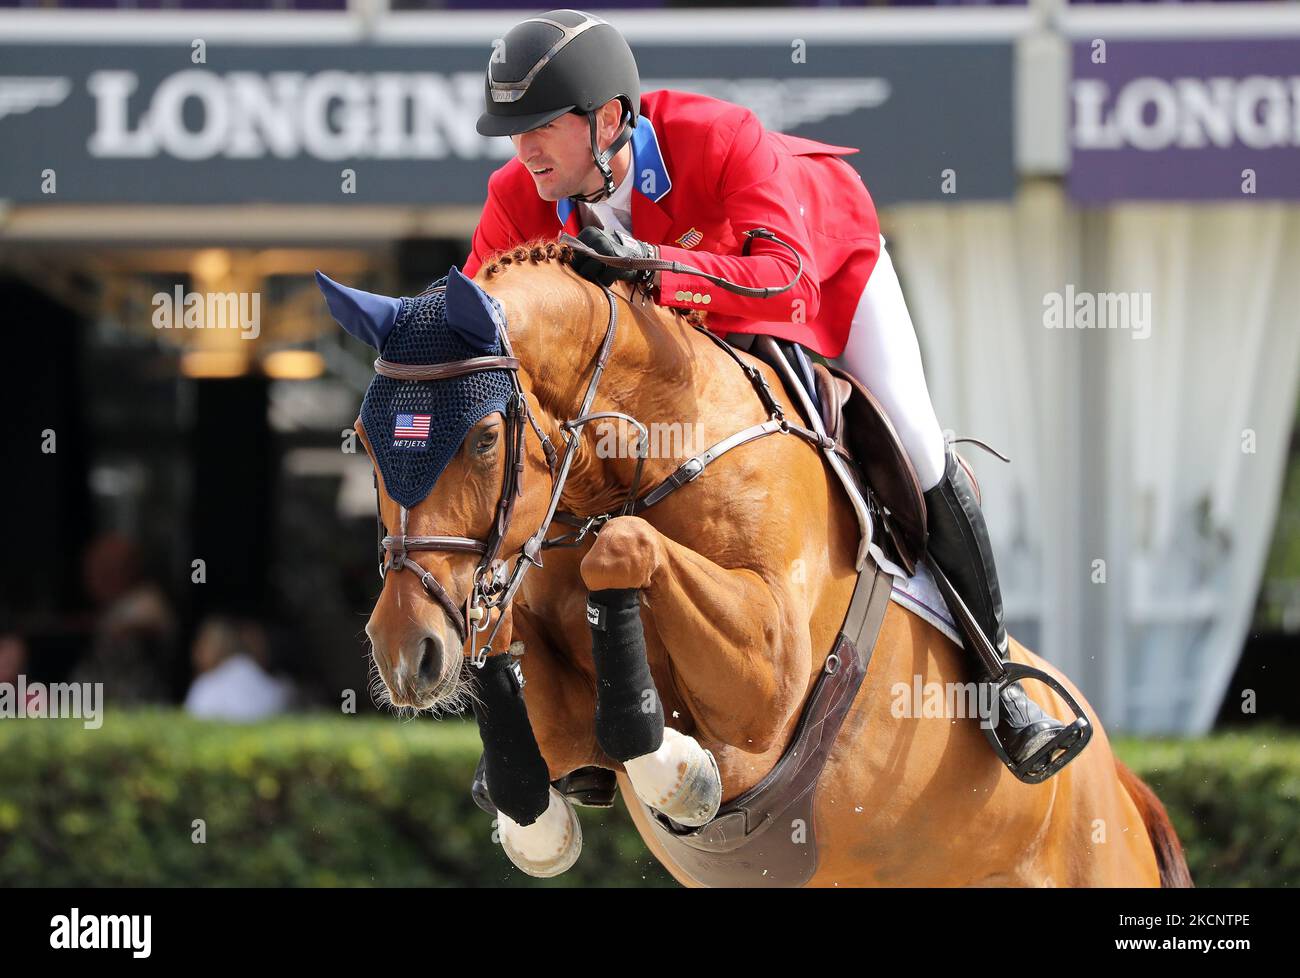 Michael Hughes riding Maya-S during the Copa Negrita, corresponding to the 109th edition of the Longines FEI Jumping Nations Cup Jumping Final, held at the Polo Club on 01st October 2021, in Barcelona, Spain. (Photo by Joan Valls/Urbanandsport/NurPhoto) Stock Photo